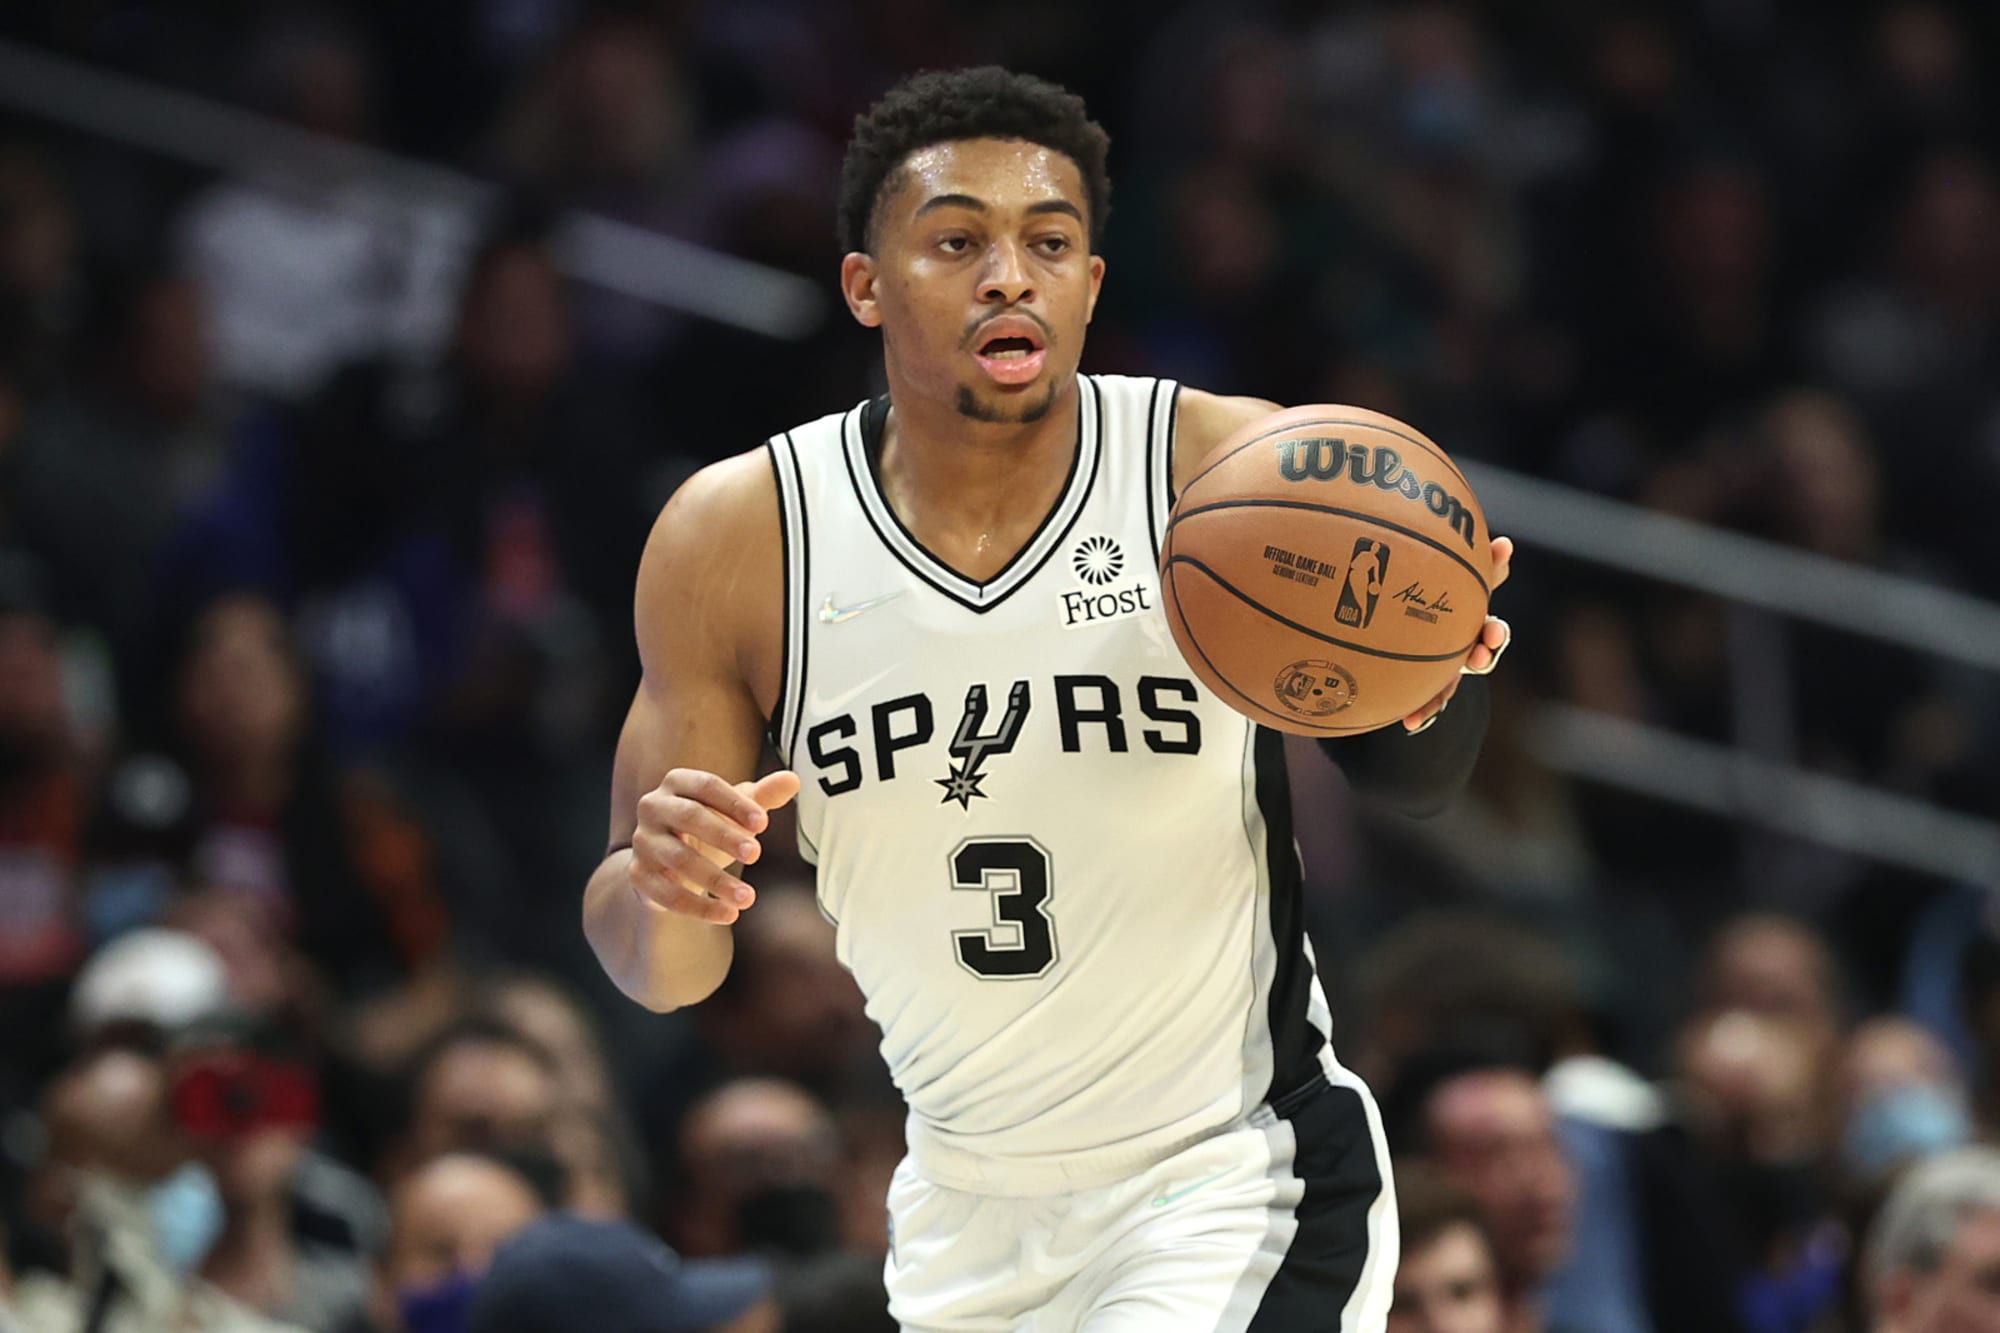 The 2022 San Antonio Spurs Starting Point Guard Is …